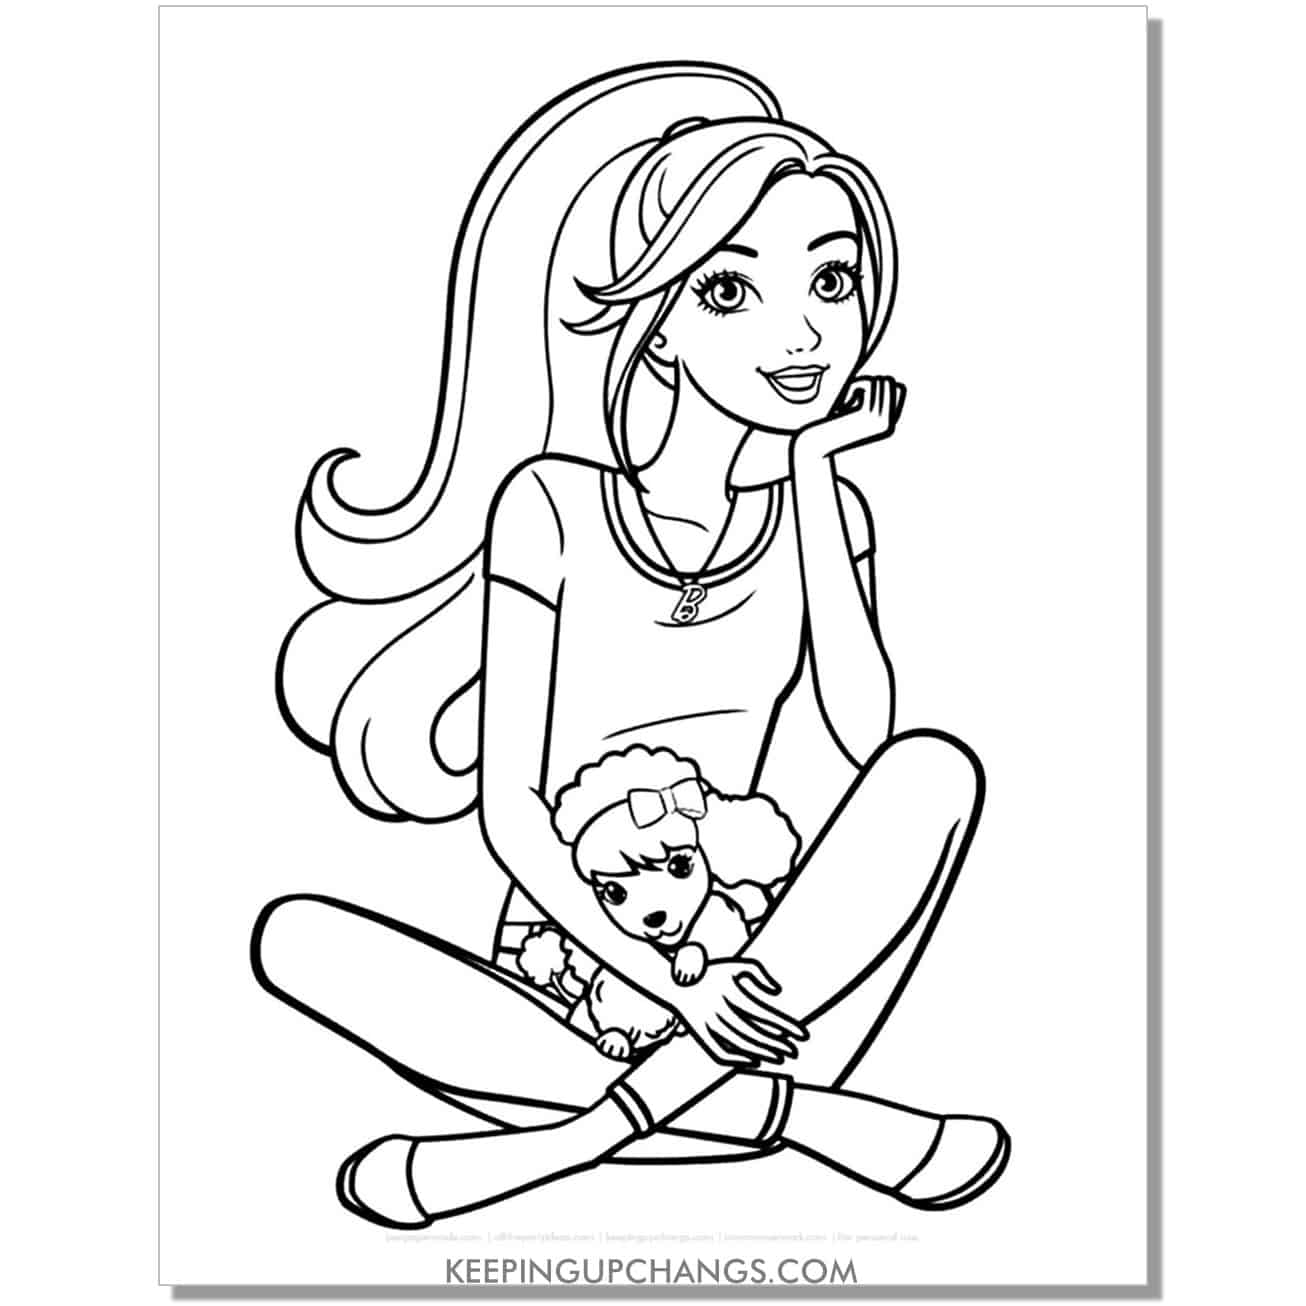 young barbie sitting with pet dog poodle in lap coloring page.